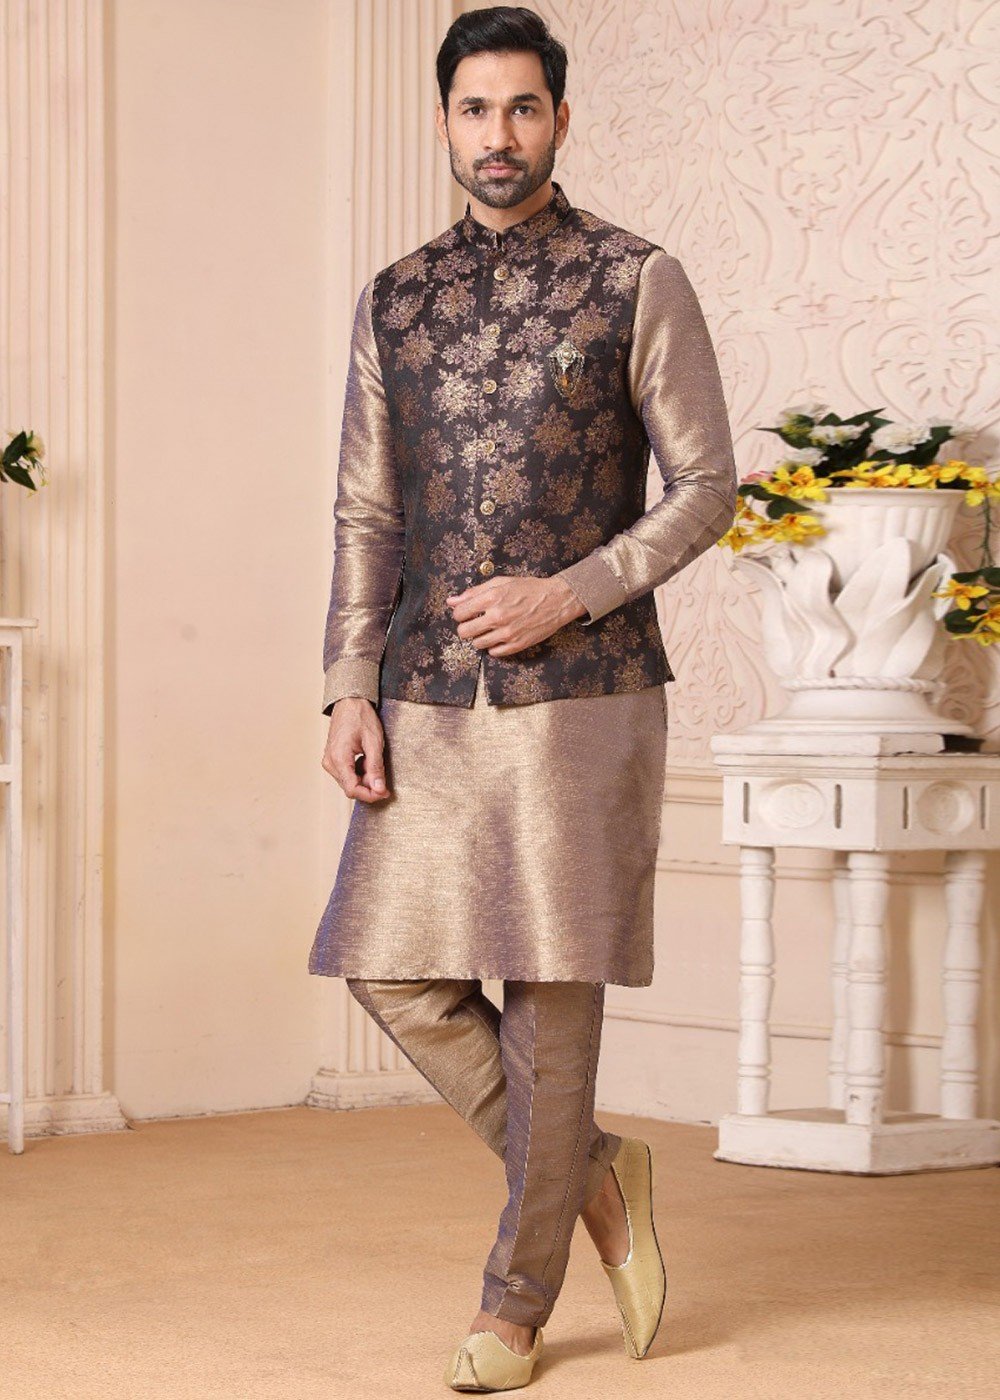 20 Latest Engagement Dresses For Men || Engagement Outfit Ideas For Indian  Groom | Indian groom wear, Groom dress men, Wedding dresses men indian